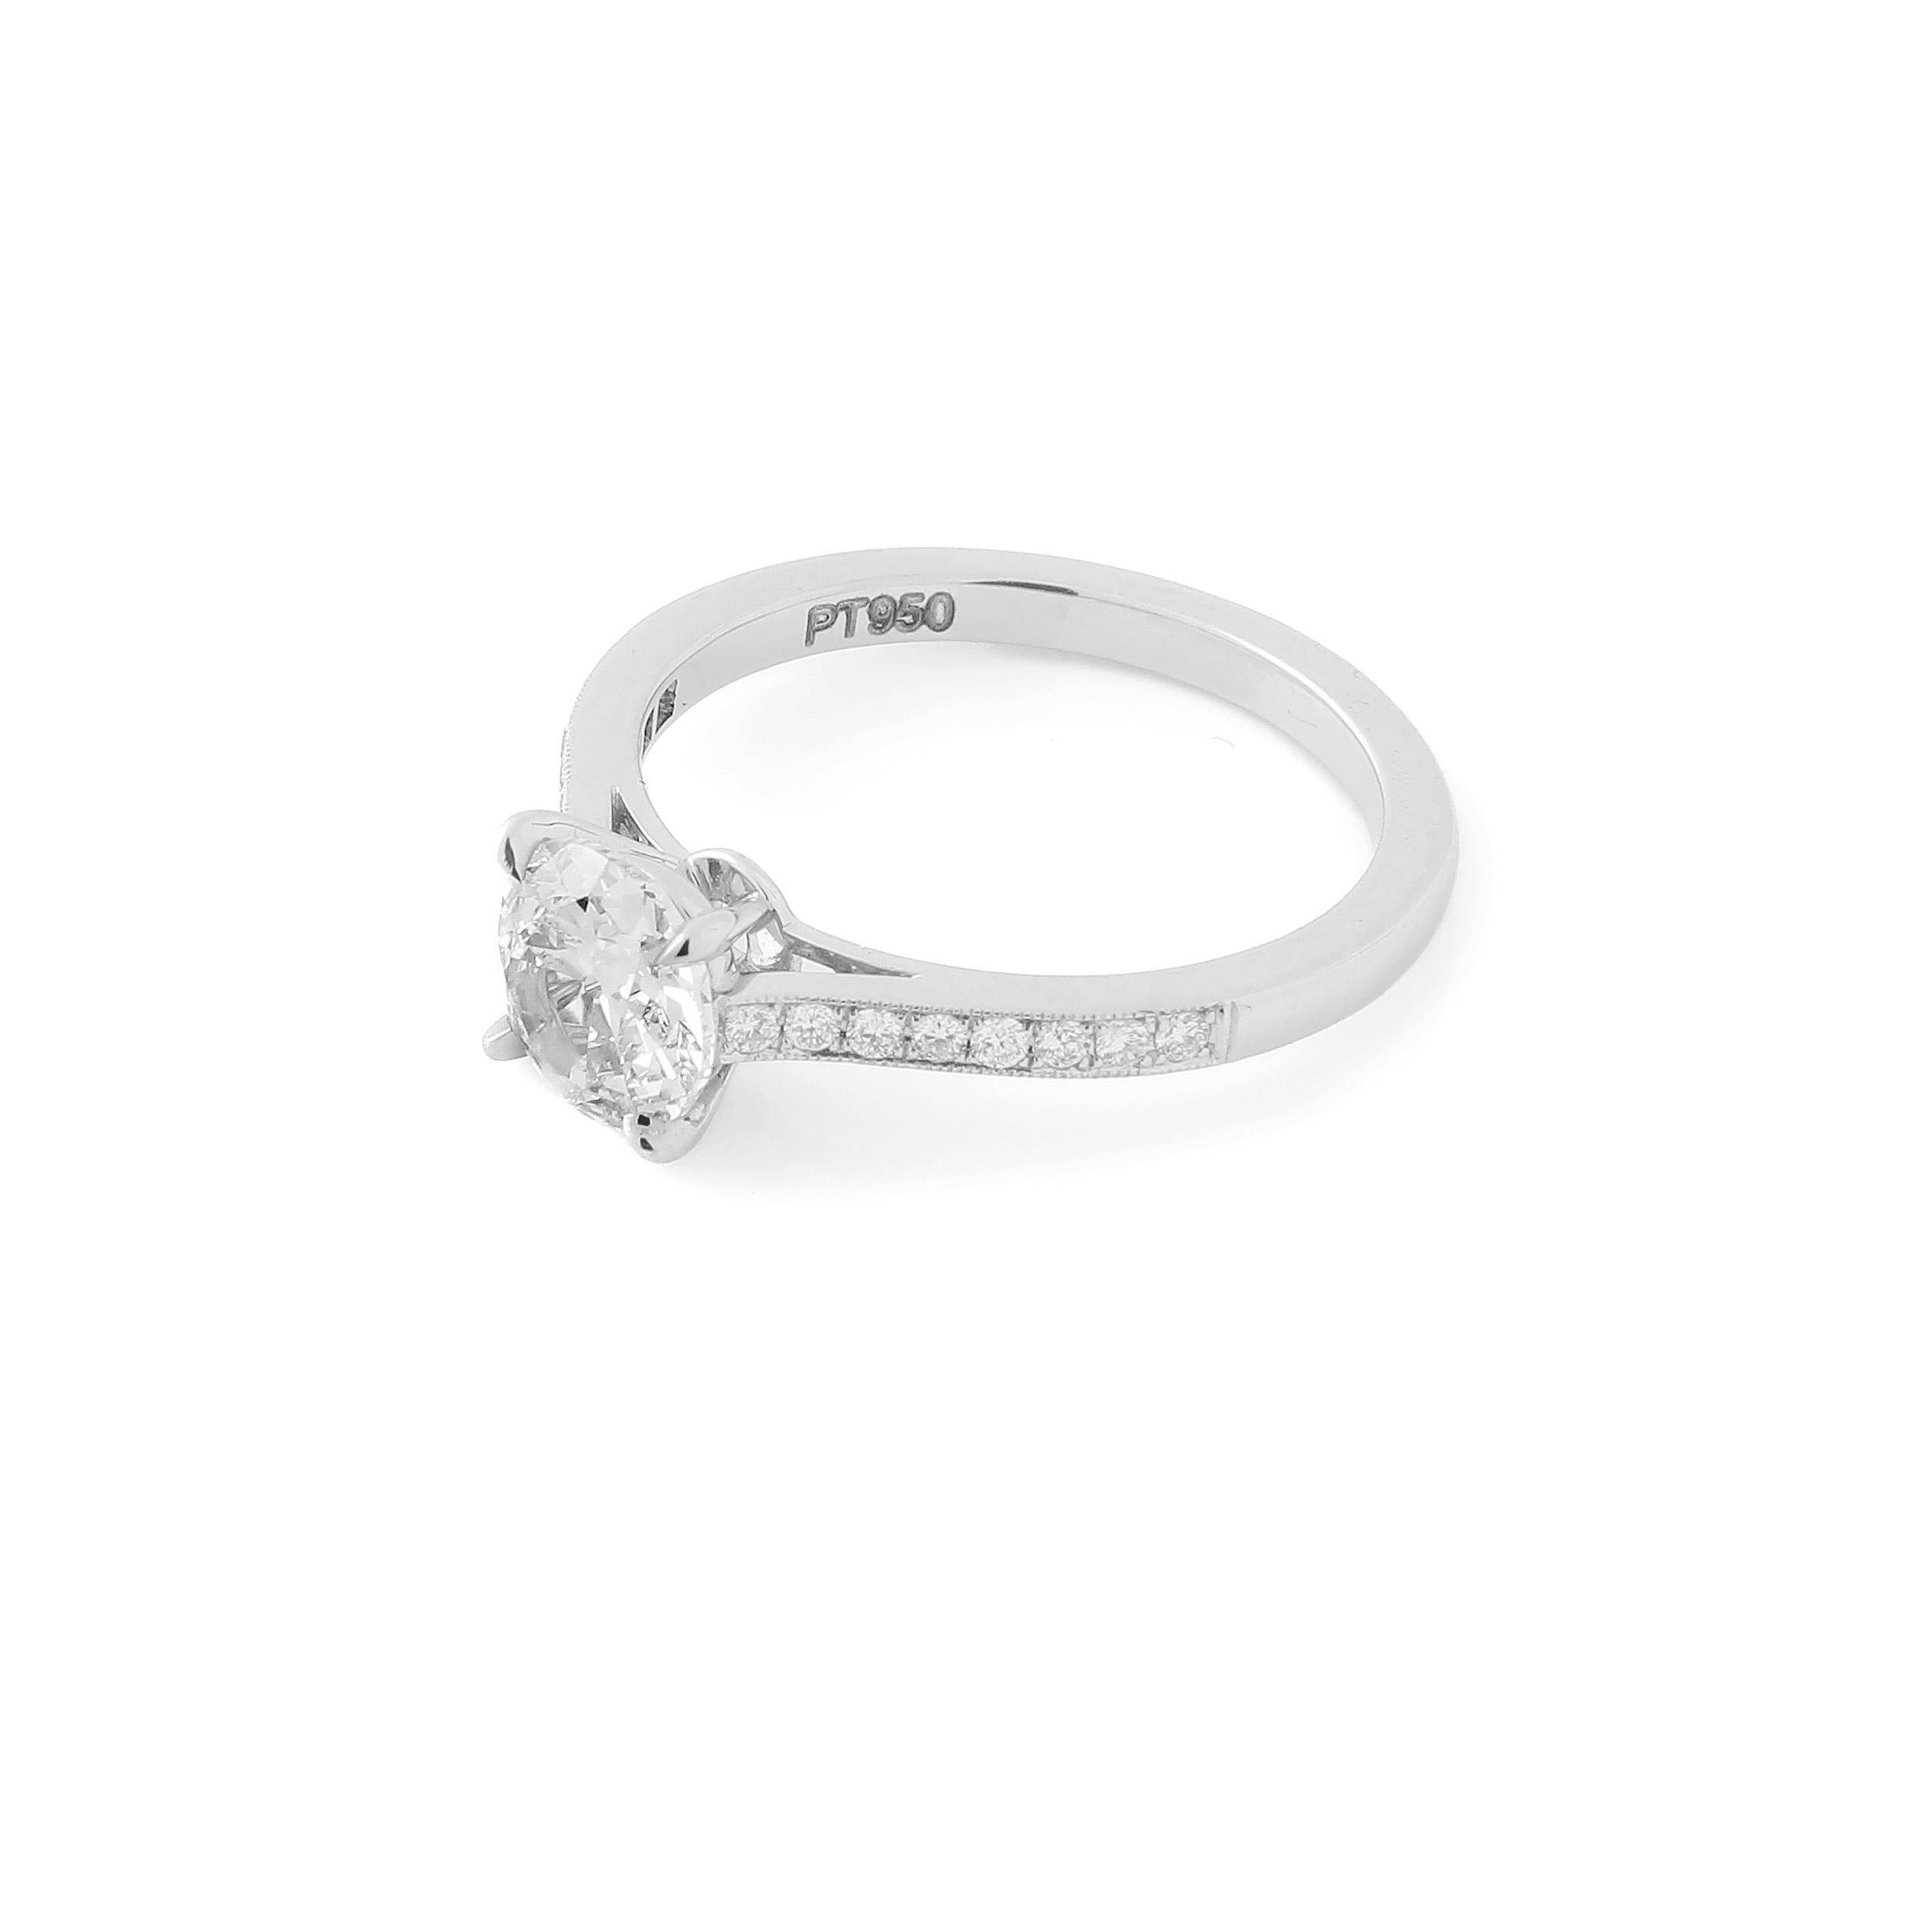 This timeless solitaire ring features a 1.04 carat F VS1 old cut round diamond, set in a classic pavé platinum mounting, made in the USA. 

Old cut diamonds like this one were cut by hand in earlier eras, often with less advanced technology and